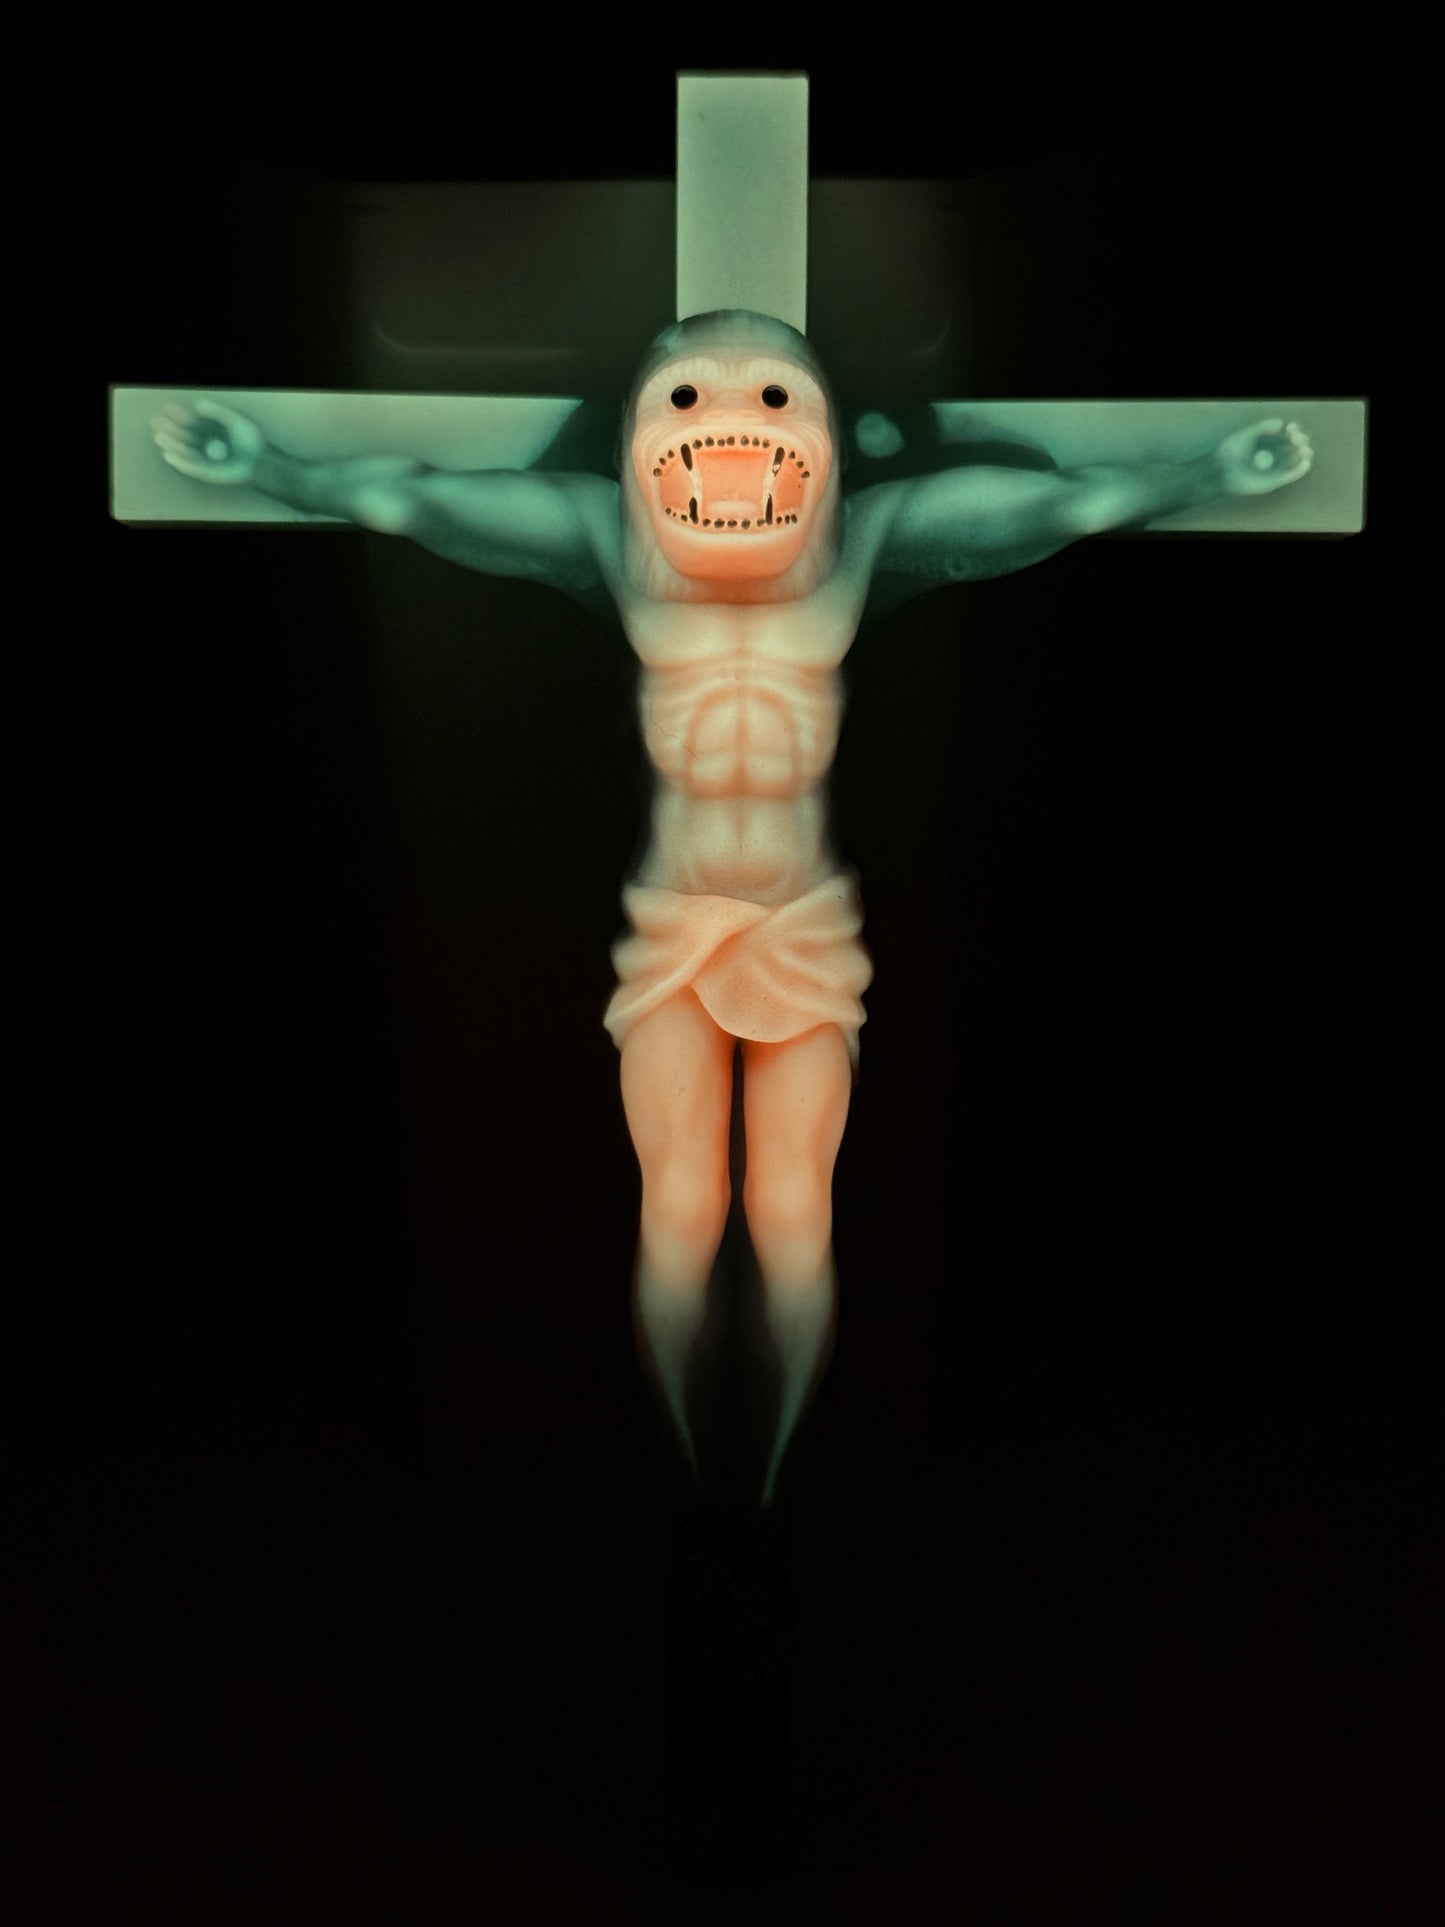 Christ on the Cross but he is an Ape, Magical Toy: Pitstop on the Way to Eternity